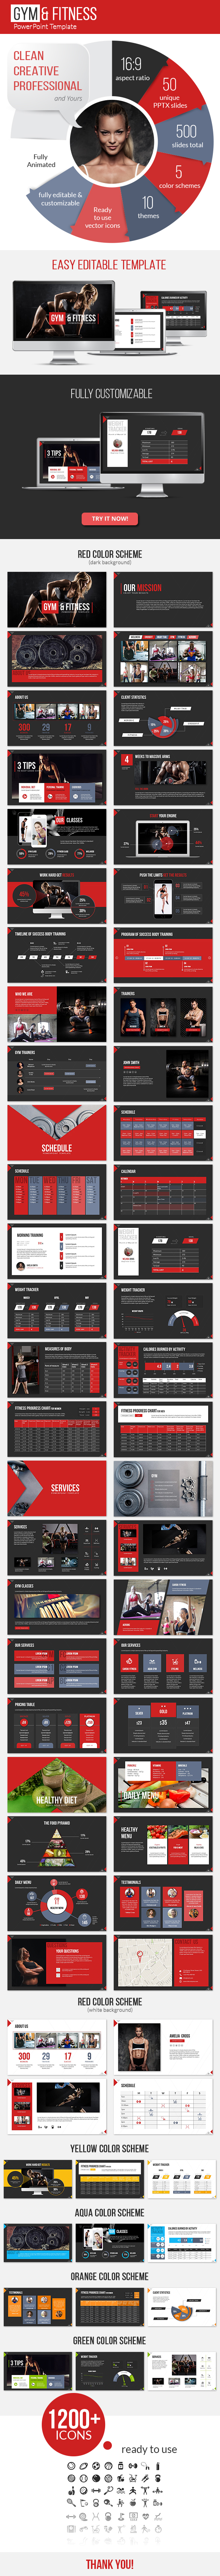 Gym and Fitness PowerPoint Presentation Template